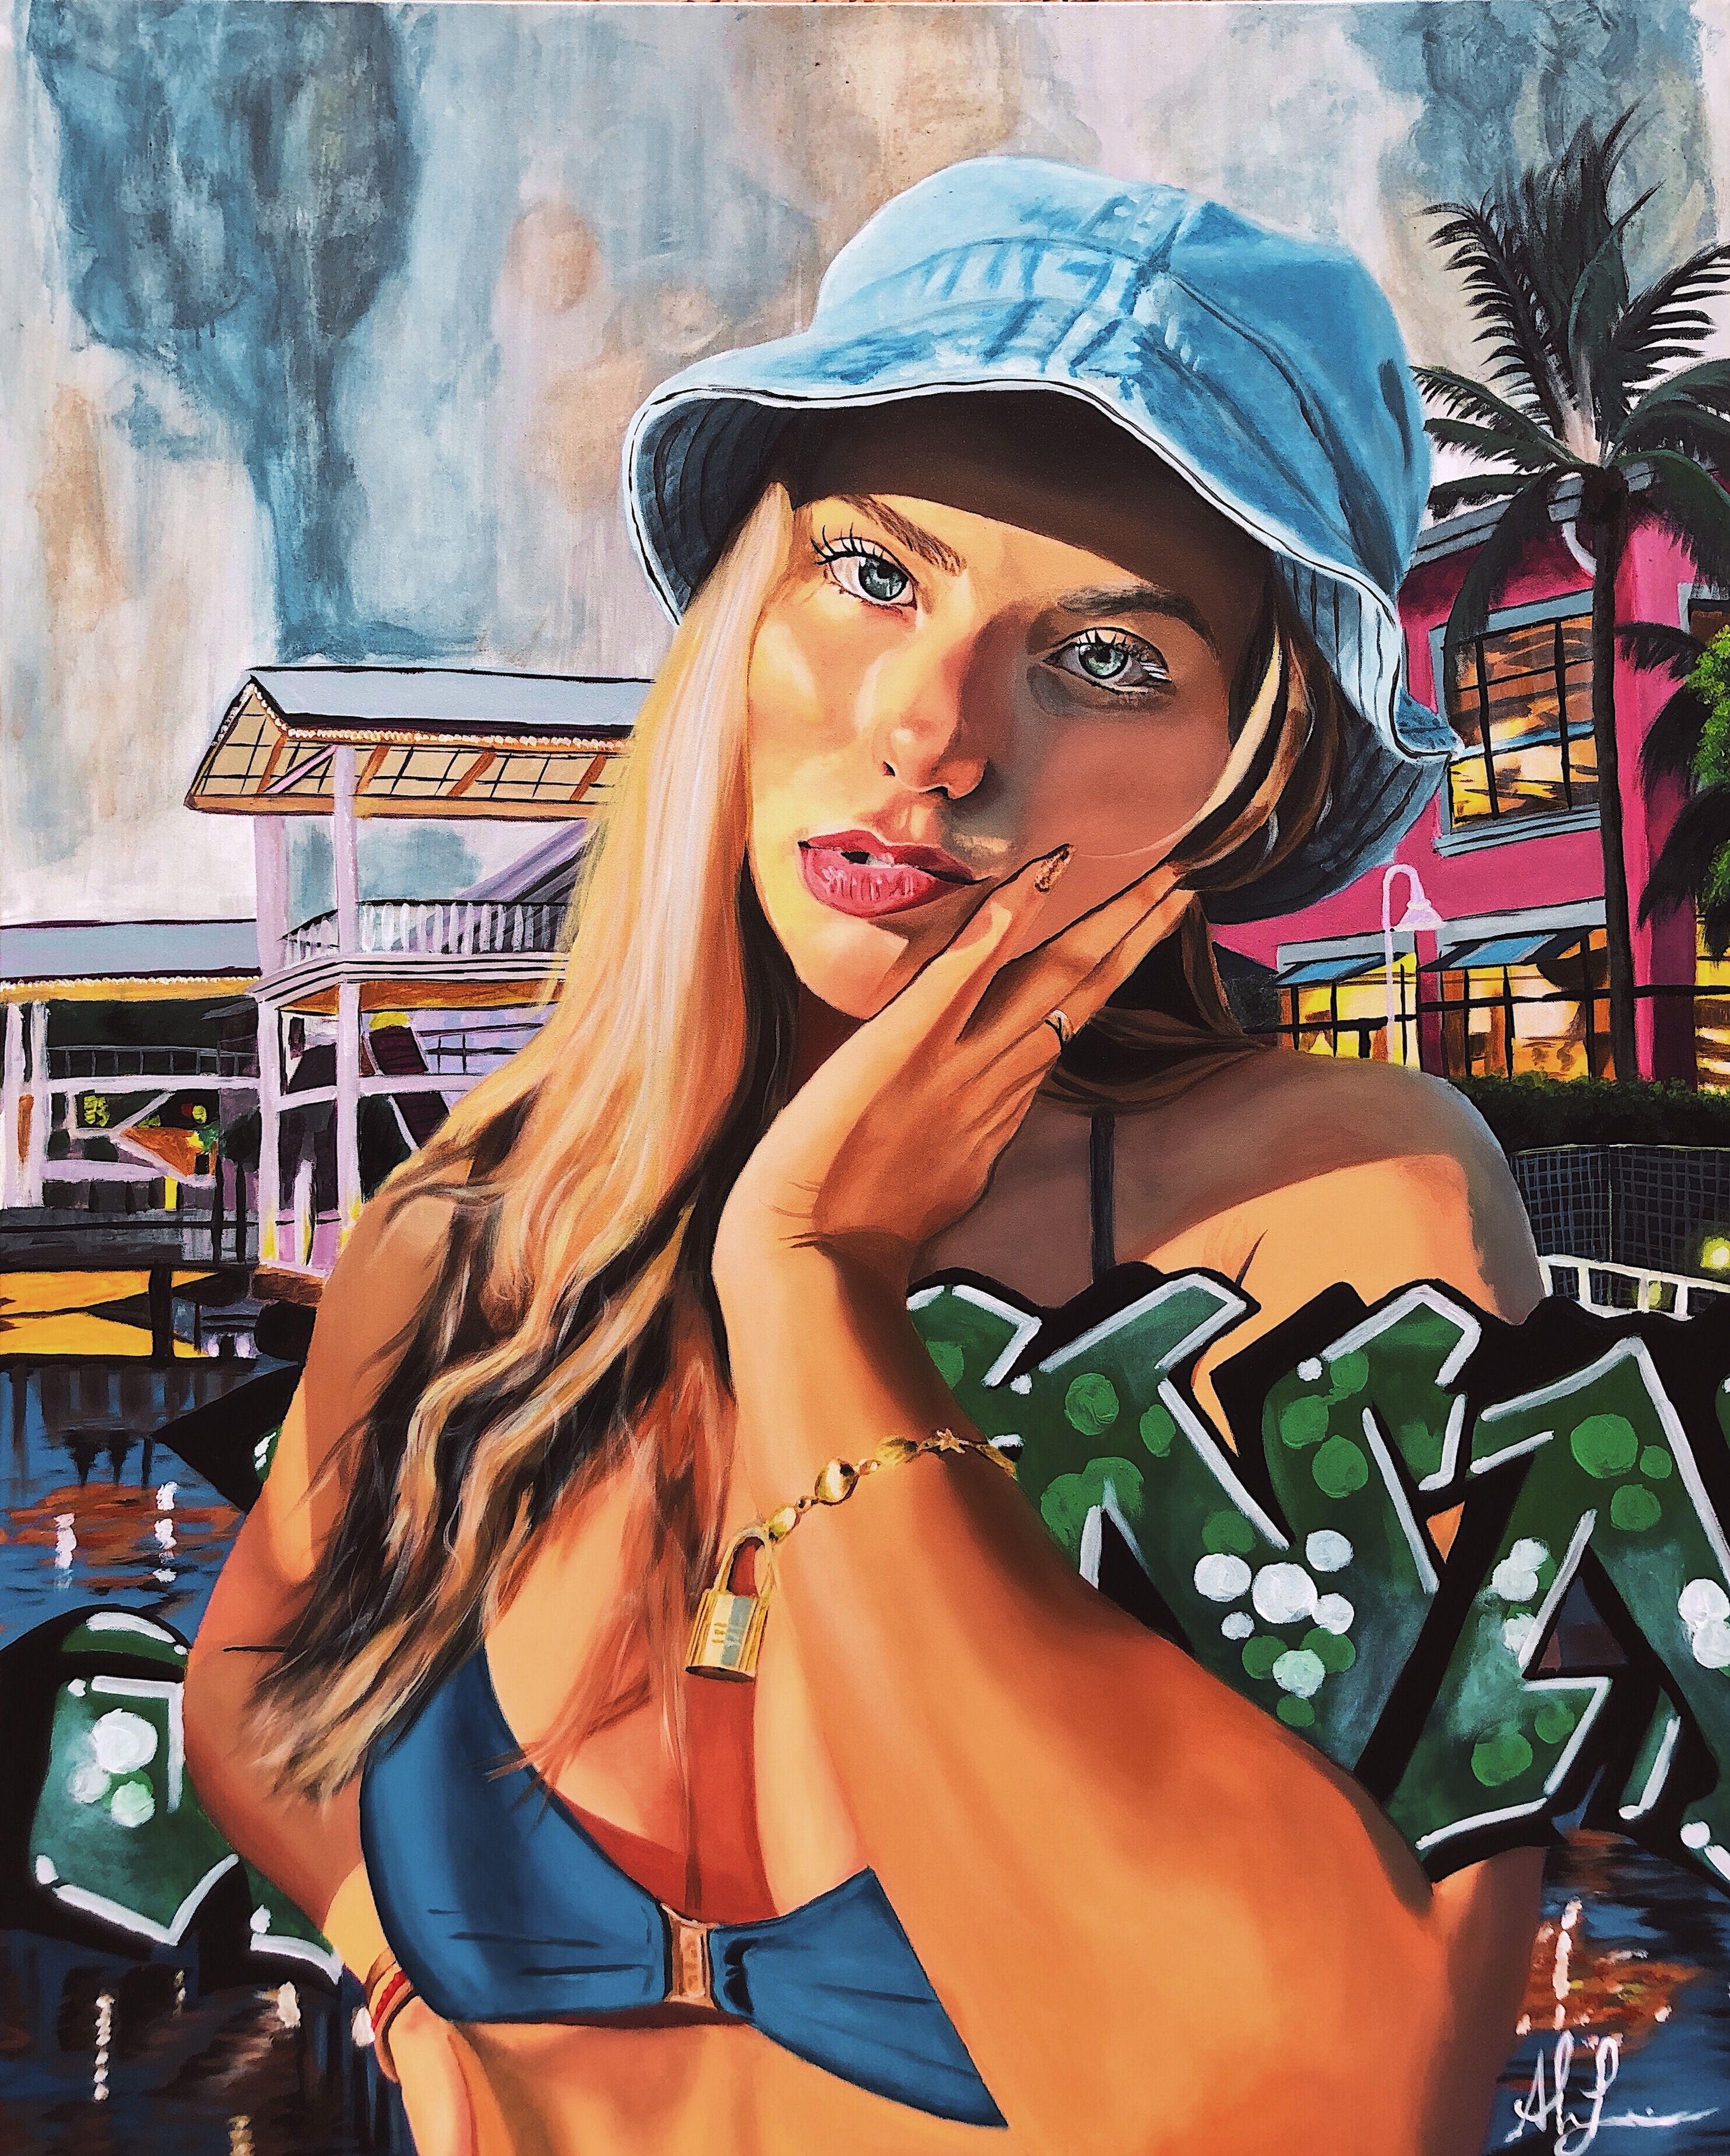 Luis Aleman Figurative Painting - Bayside, Painting, Acrylic on Canvas